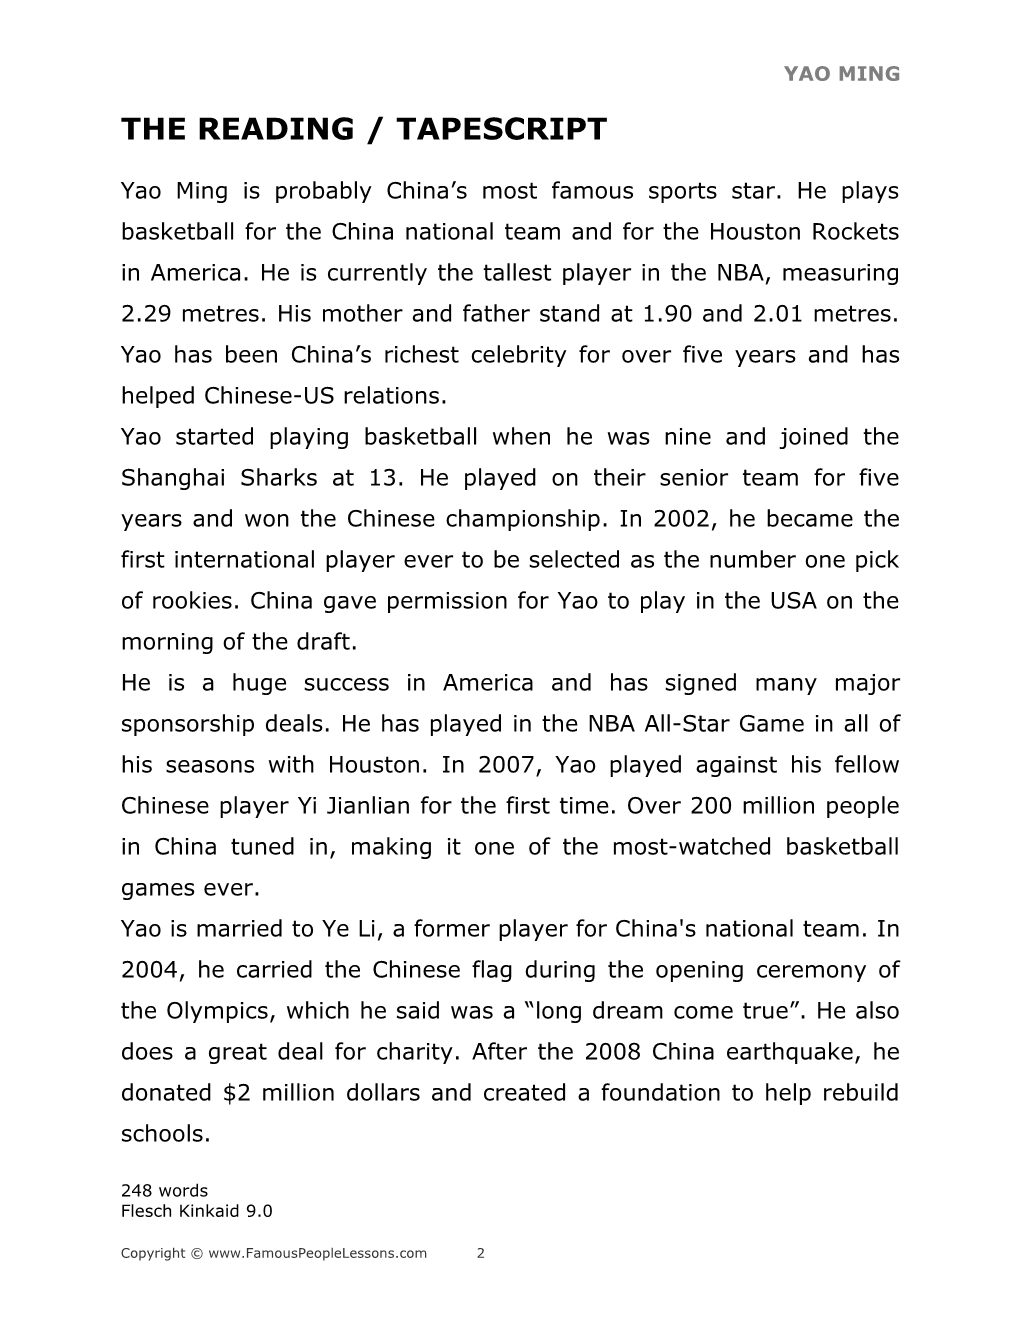 Famous People Lessons - Yao Ming